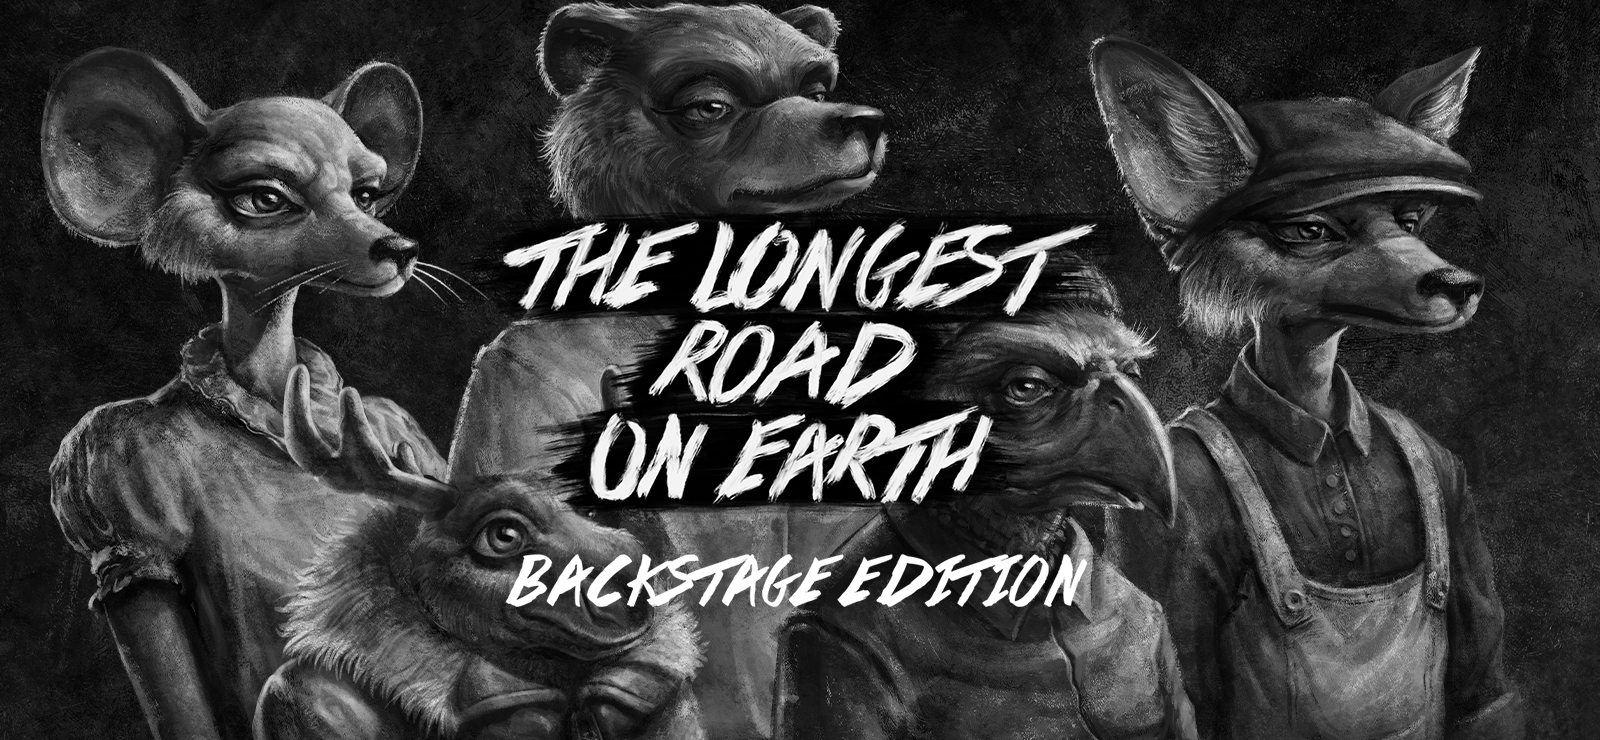 The Longest Road On Earth Backstage Edition